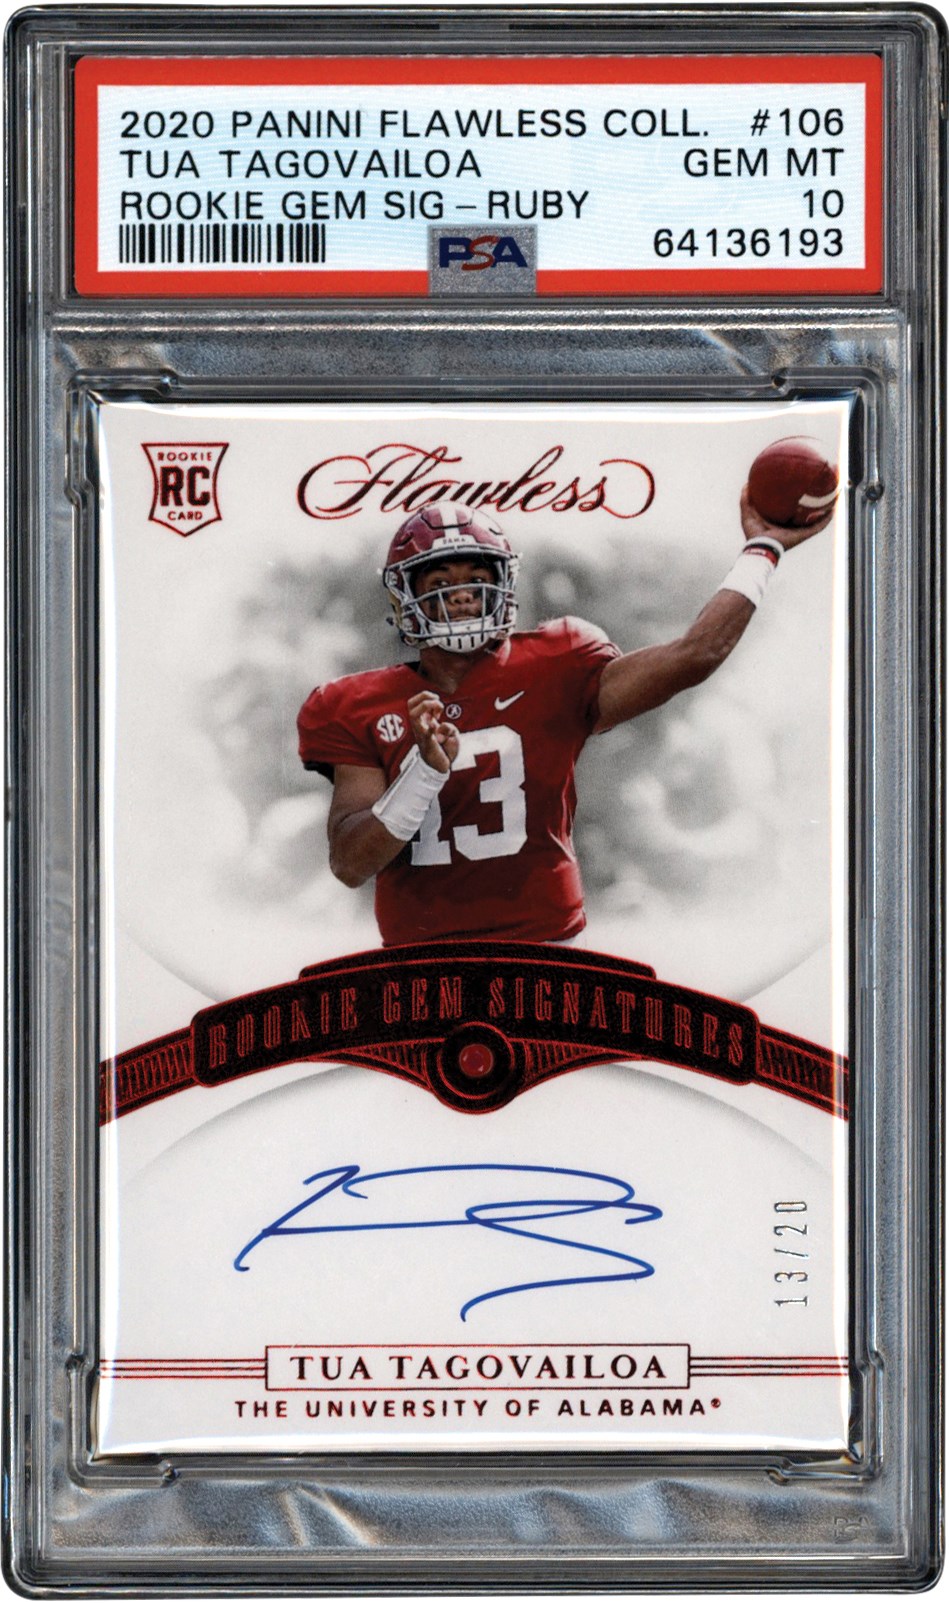 - 2020 Panini Flawless Football Collection #106 Tua Tagovailoa Rookie Gem Signatures Ruby Card PSA GEM MT 10 (Pop 1 - None Higher!)